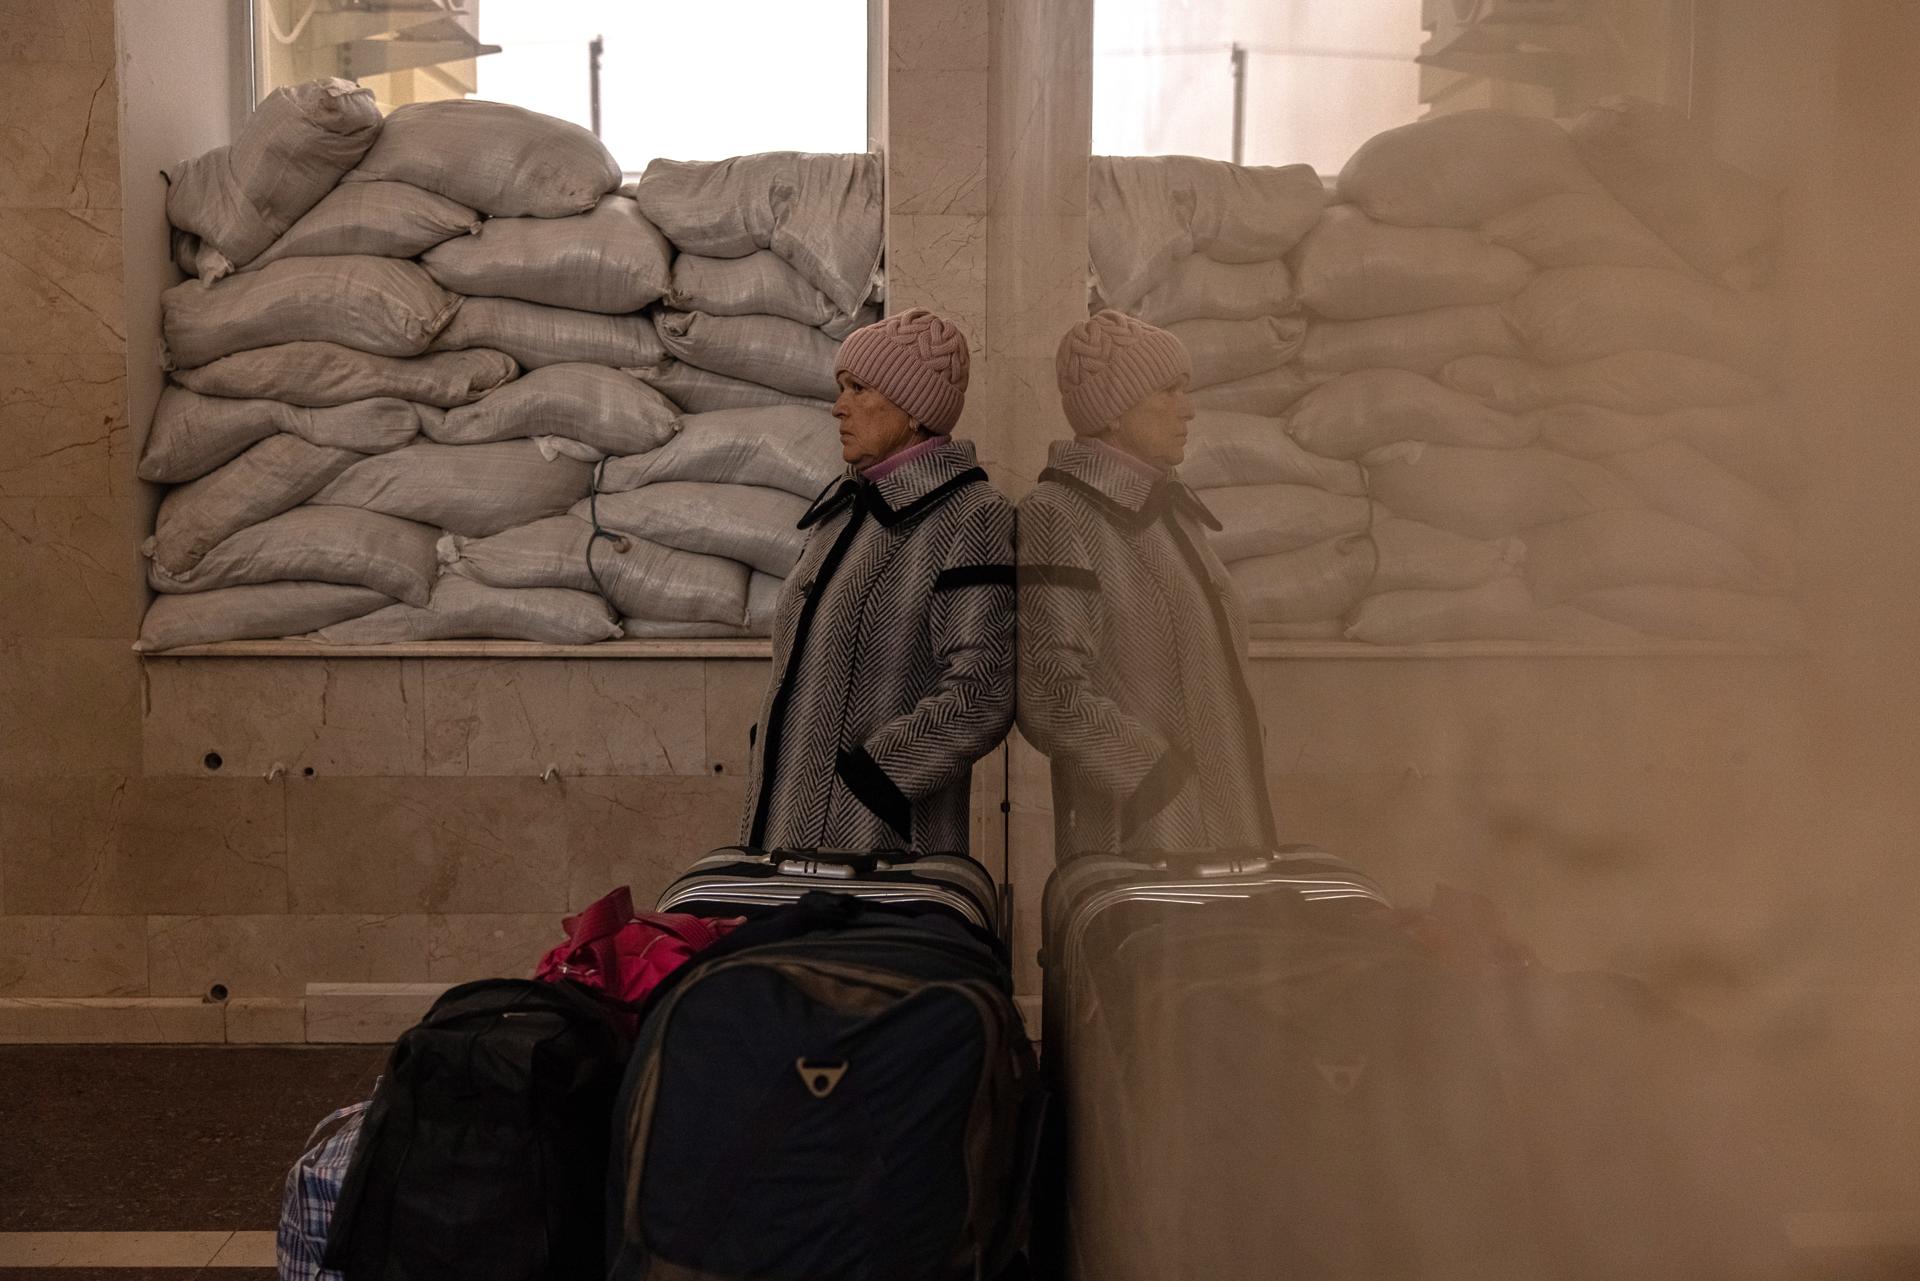 Nina, who spent the whole time in Kherson during the Russian occupation, waits for her family members next to luggage before boarding an evacuation train heading to Kyiv, at the railway station in Kherson, southern Ukraine, 23 November 2022. (Issued on 21 February 2023). EFE-EPA FILE/ROMAN PILIPEY
